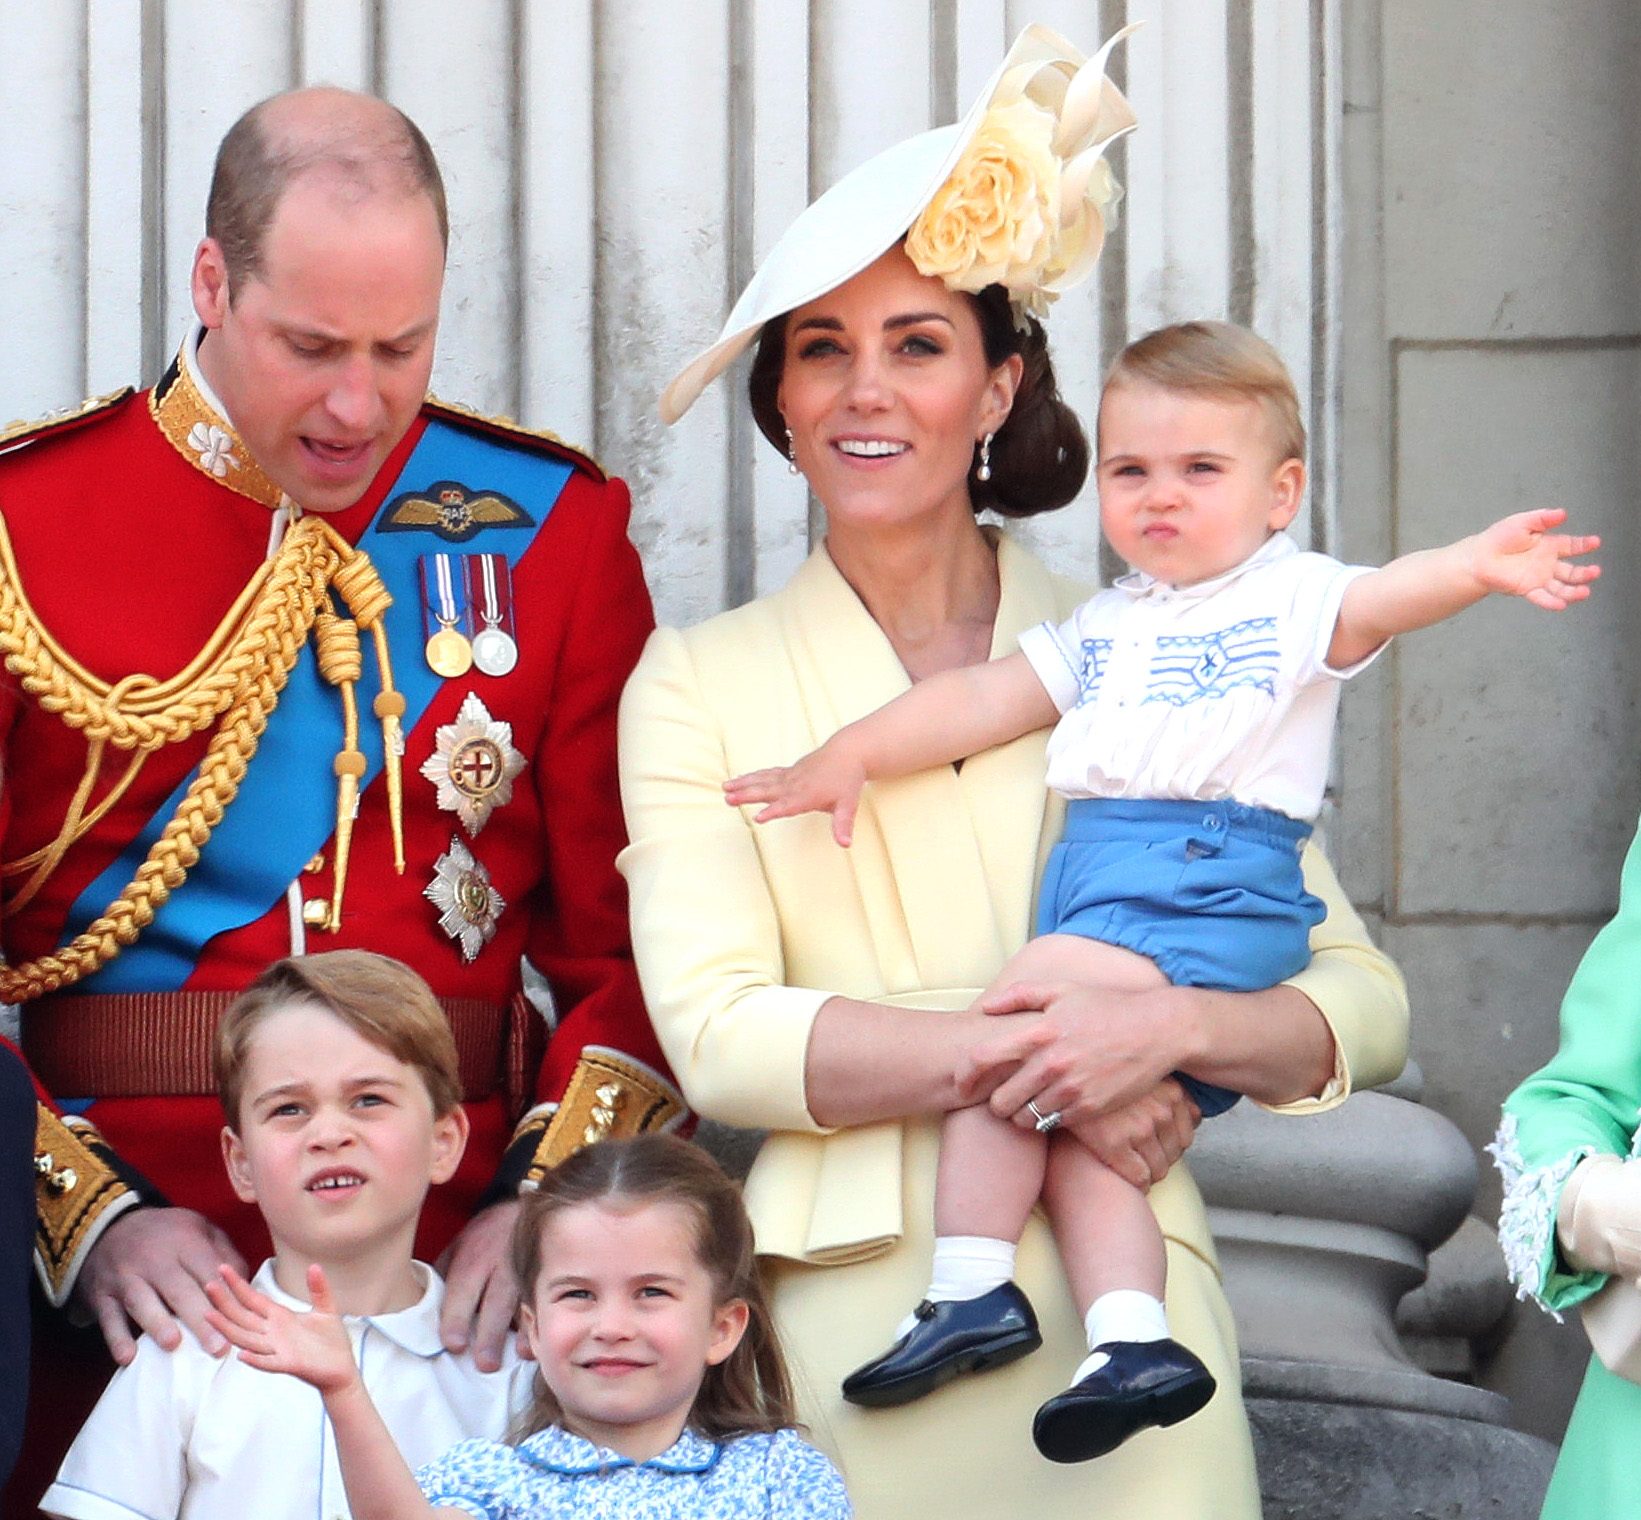 Príncipe William, Kate Middleton e família real no Trooping the Colour 2019.